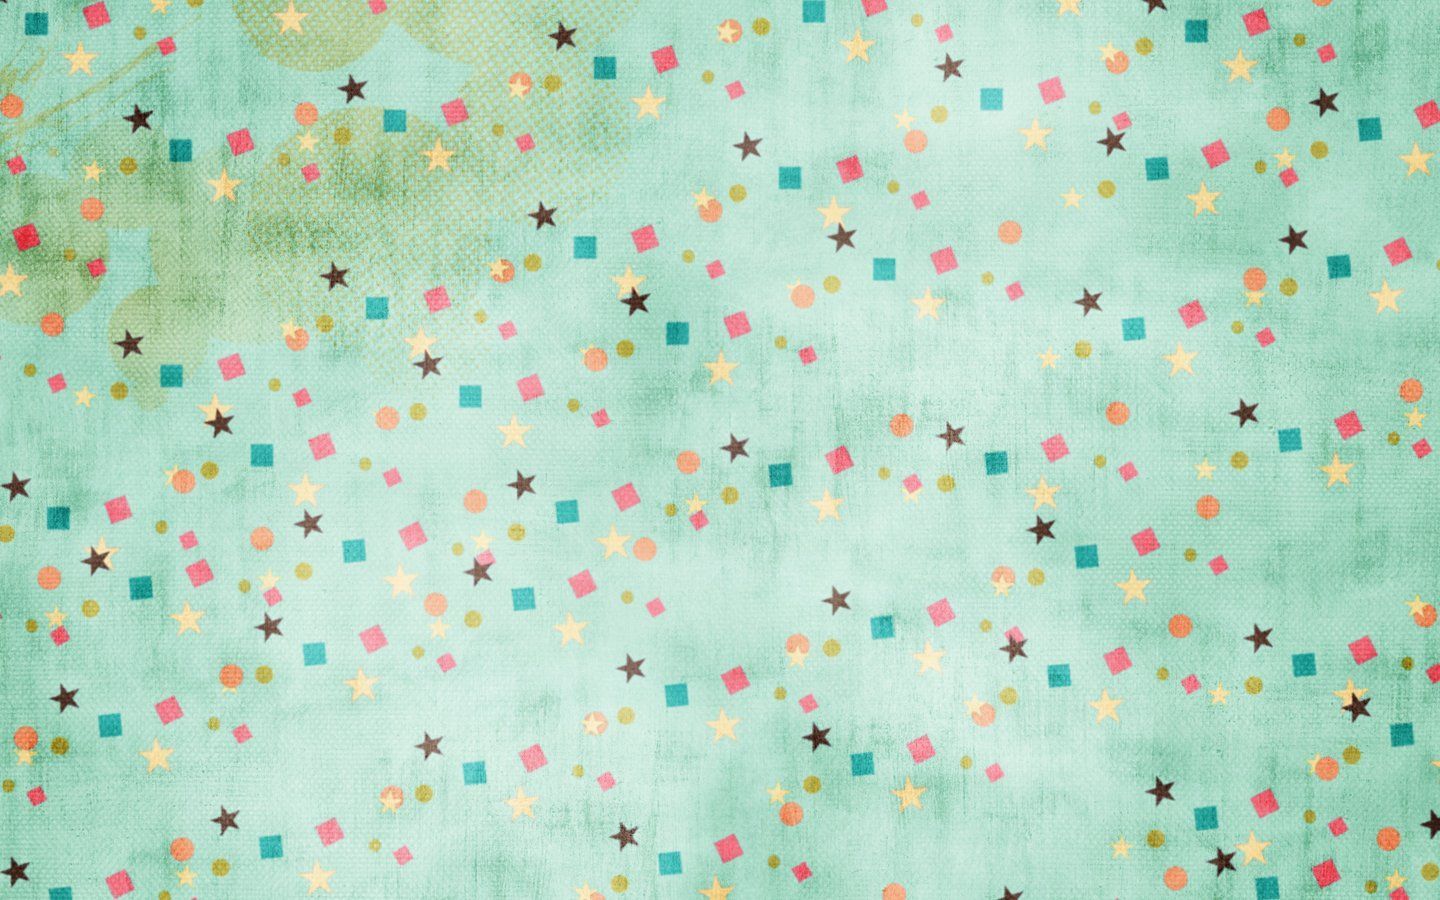 Fabric texture 14741 - Background patterns - Others